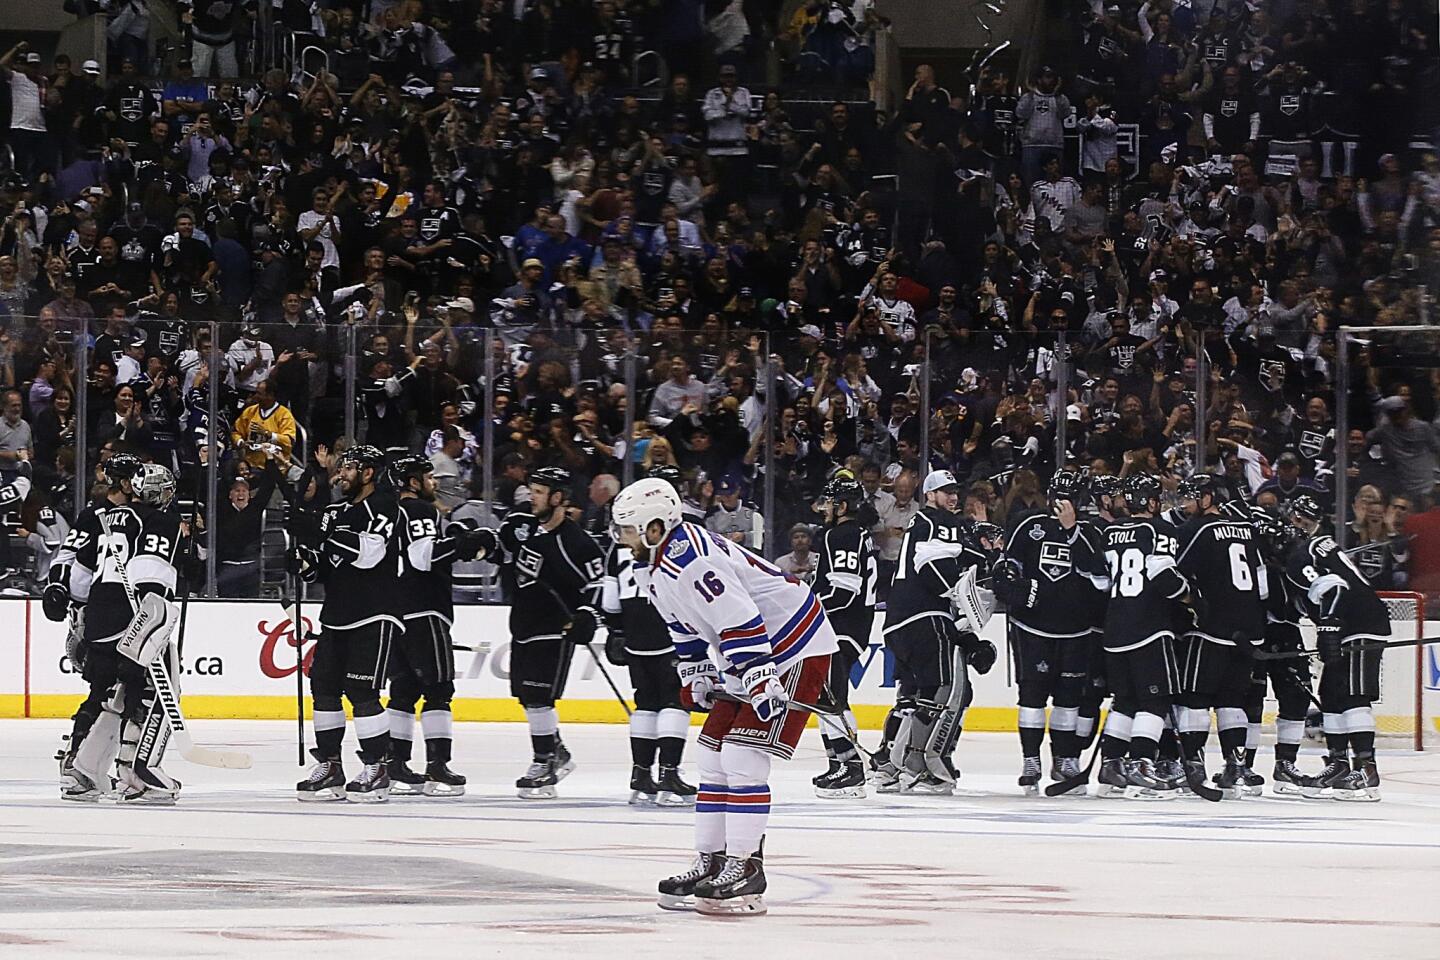 New York Rangers forward Derick Brassard skates off the ice as the Kings and their fans celebrate the team's 3-2 overtime win in Game 1 of the Stanley Cup Final at Staples Center.